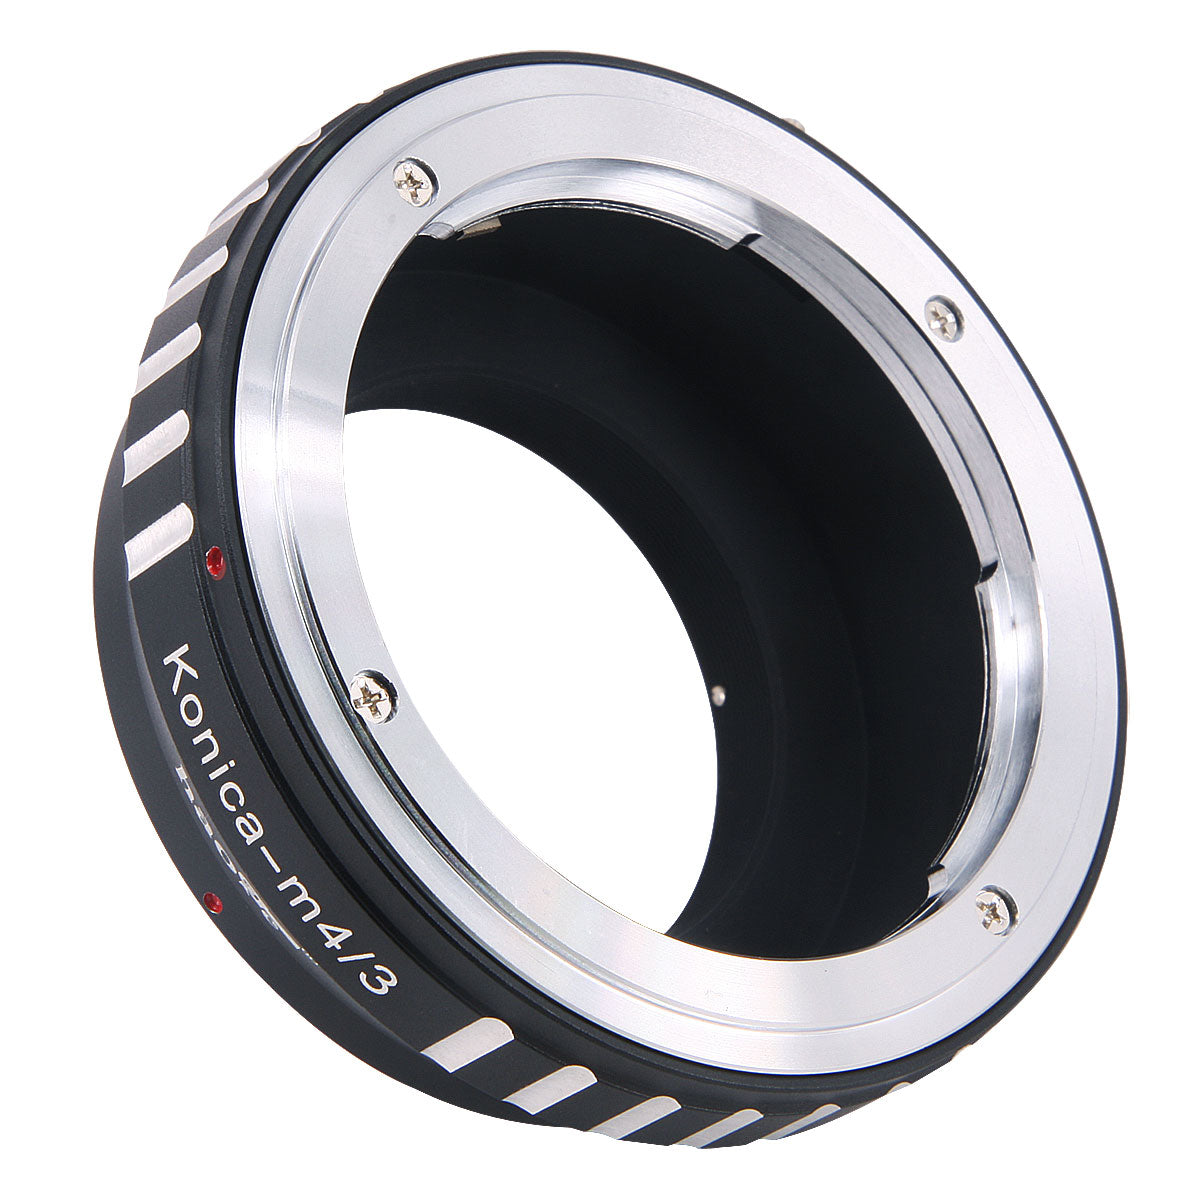 Haoge Manual Lens Mount Adapter for Konica AR Mount Lens to Olympus and Panasonic Micro Four Thirds MFT M4/3 M43 Mount Camera